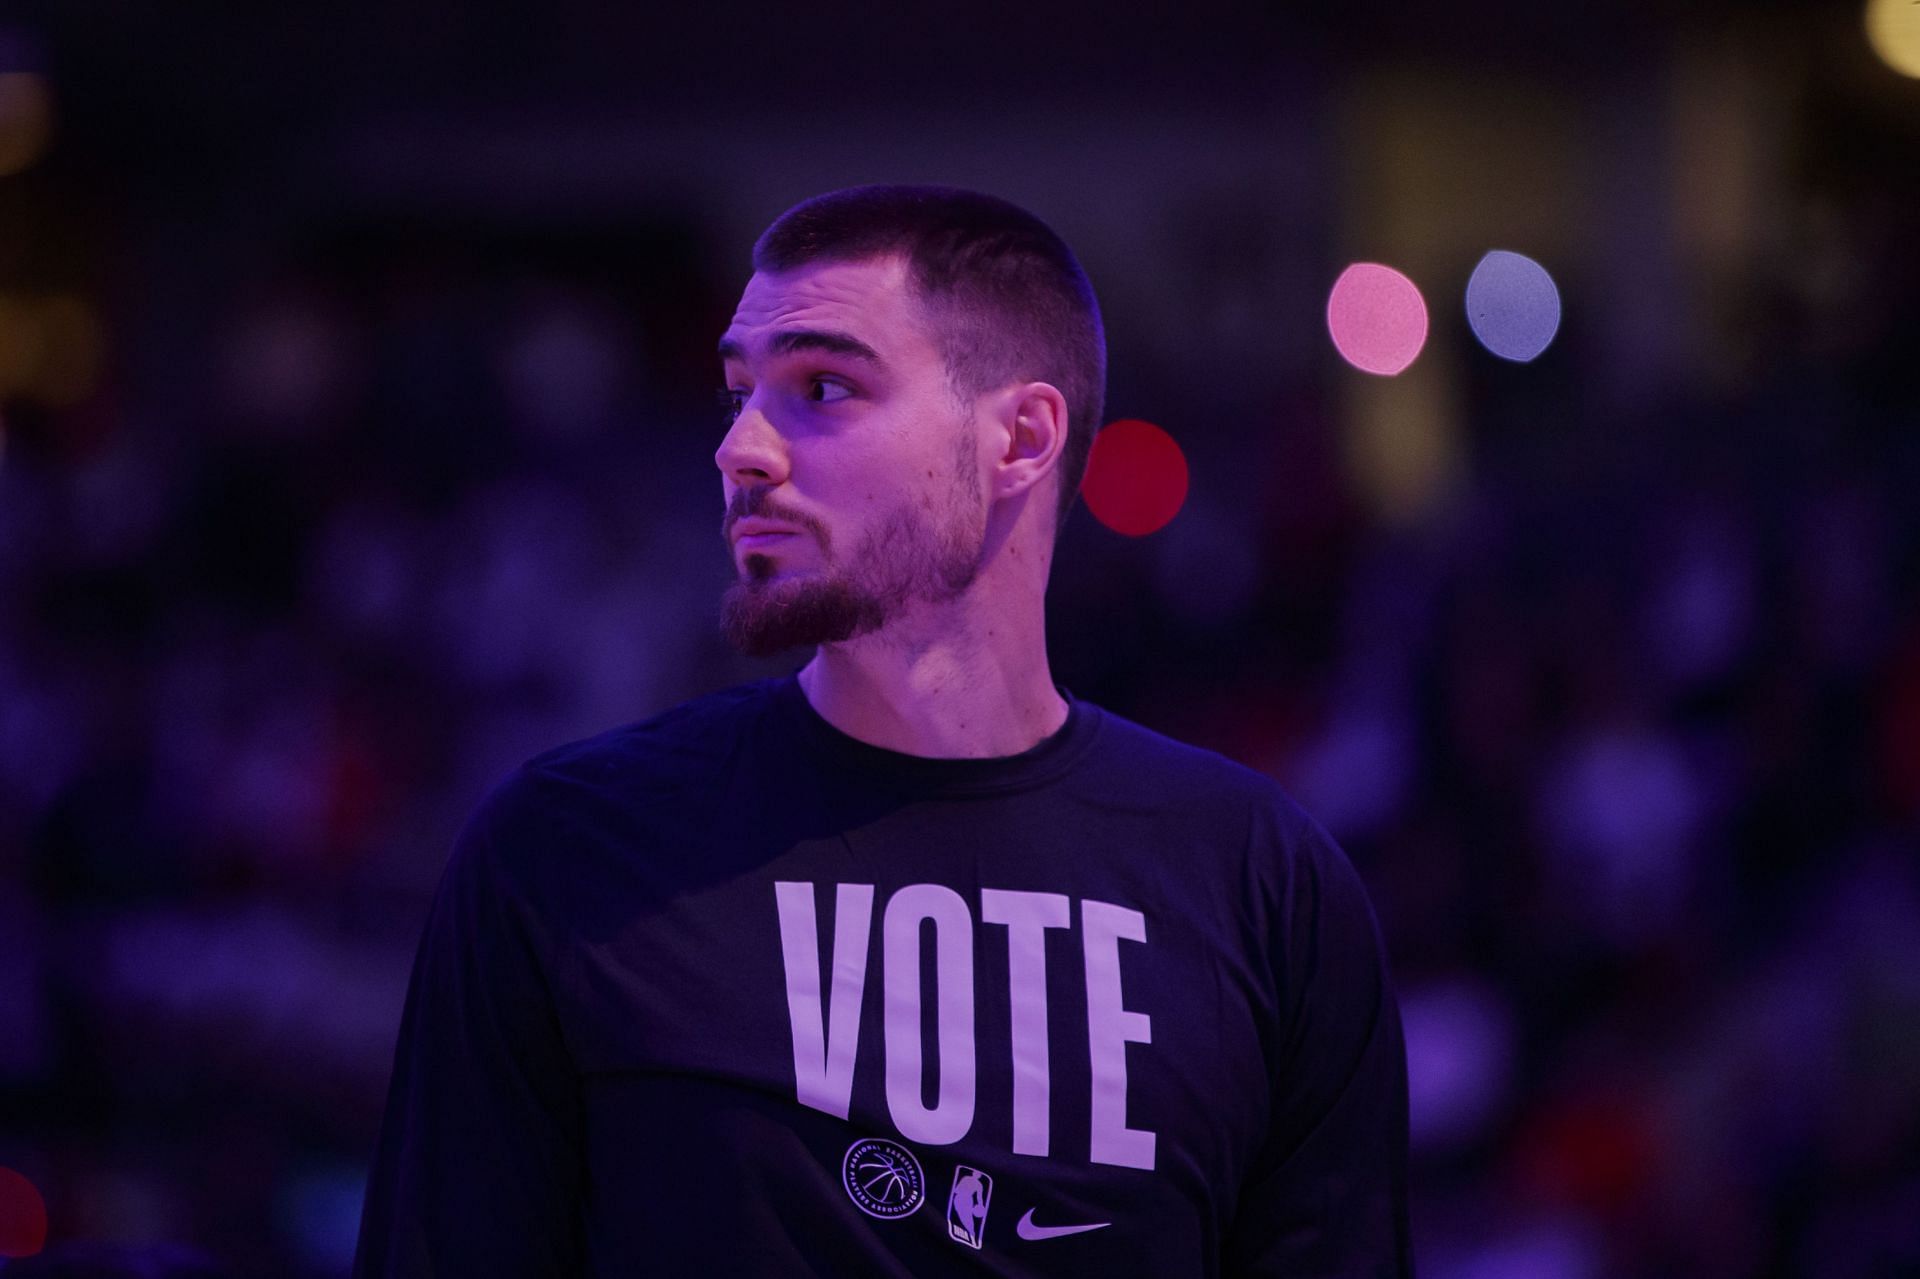 Cruz missile it is then: Juancho Hernangomez gets mocked by NBA fans for  claiming he doesn't like being called 'Bo Cruz